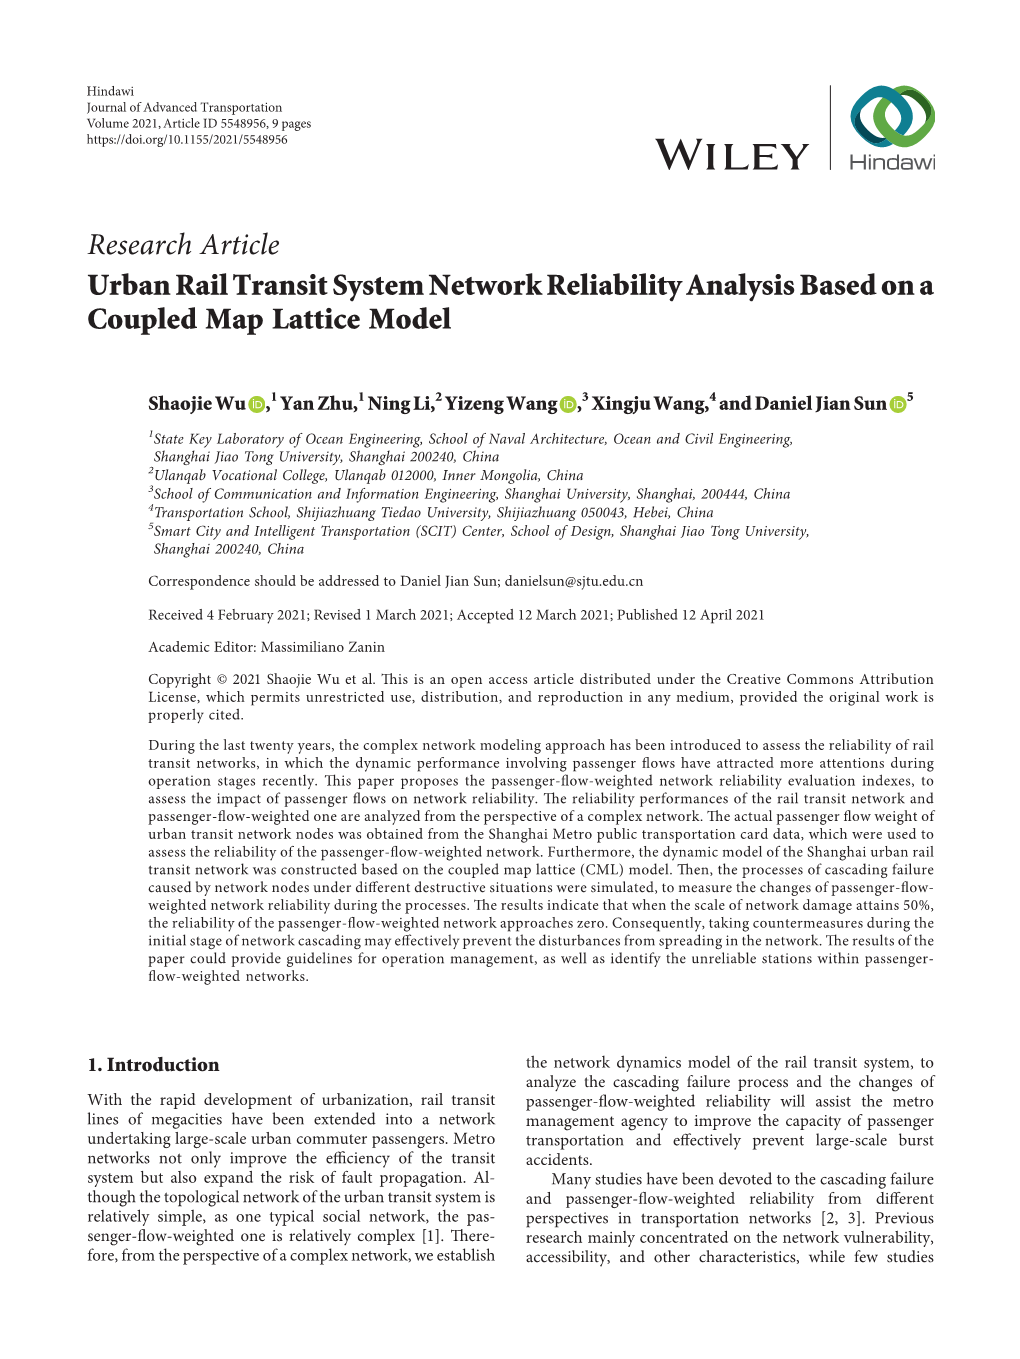 Urban Rail Transit System Network Reliability Analysis Based on a Coupled Map Lattice Model